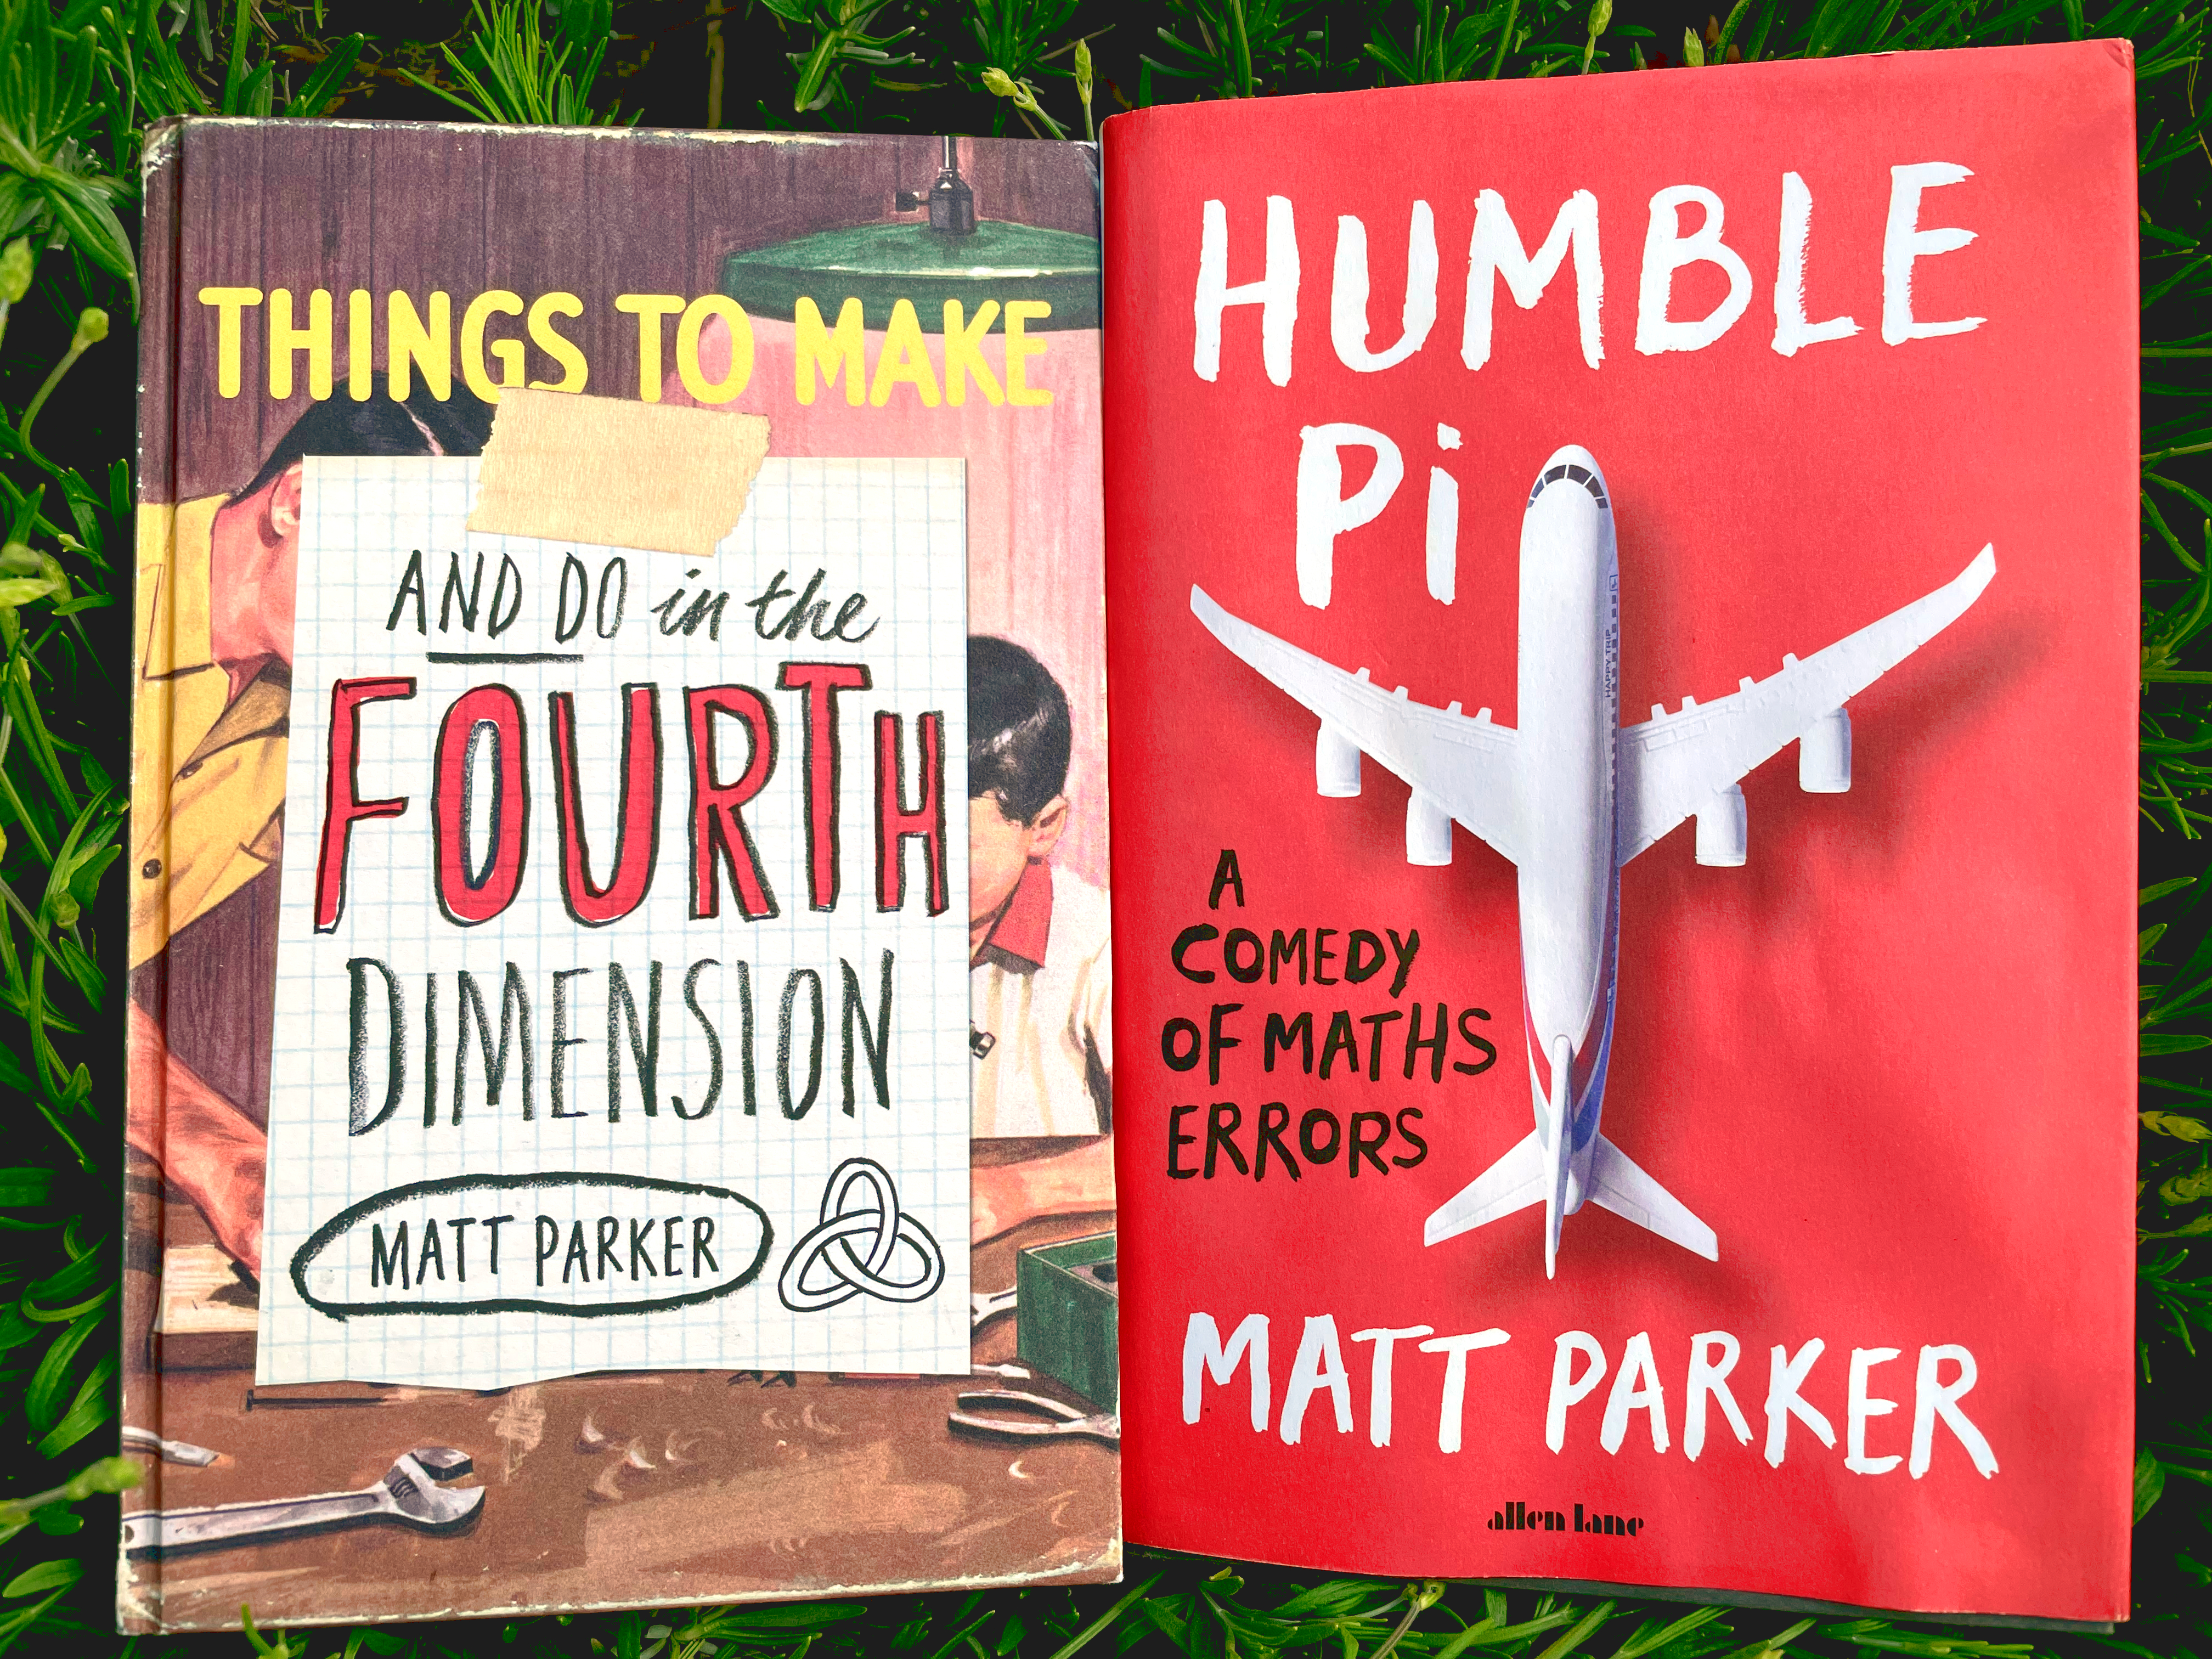 Books: Things to Make and Do in the Fourth Dimension and Humble Pi, both by Matt Parker